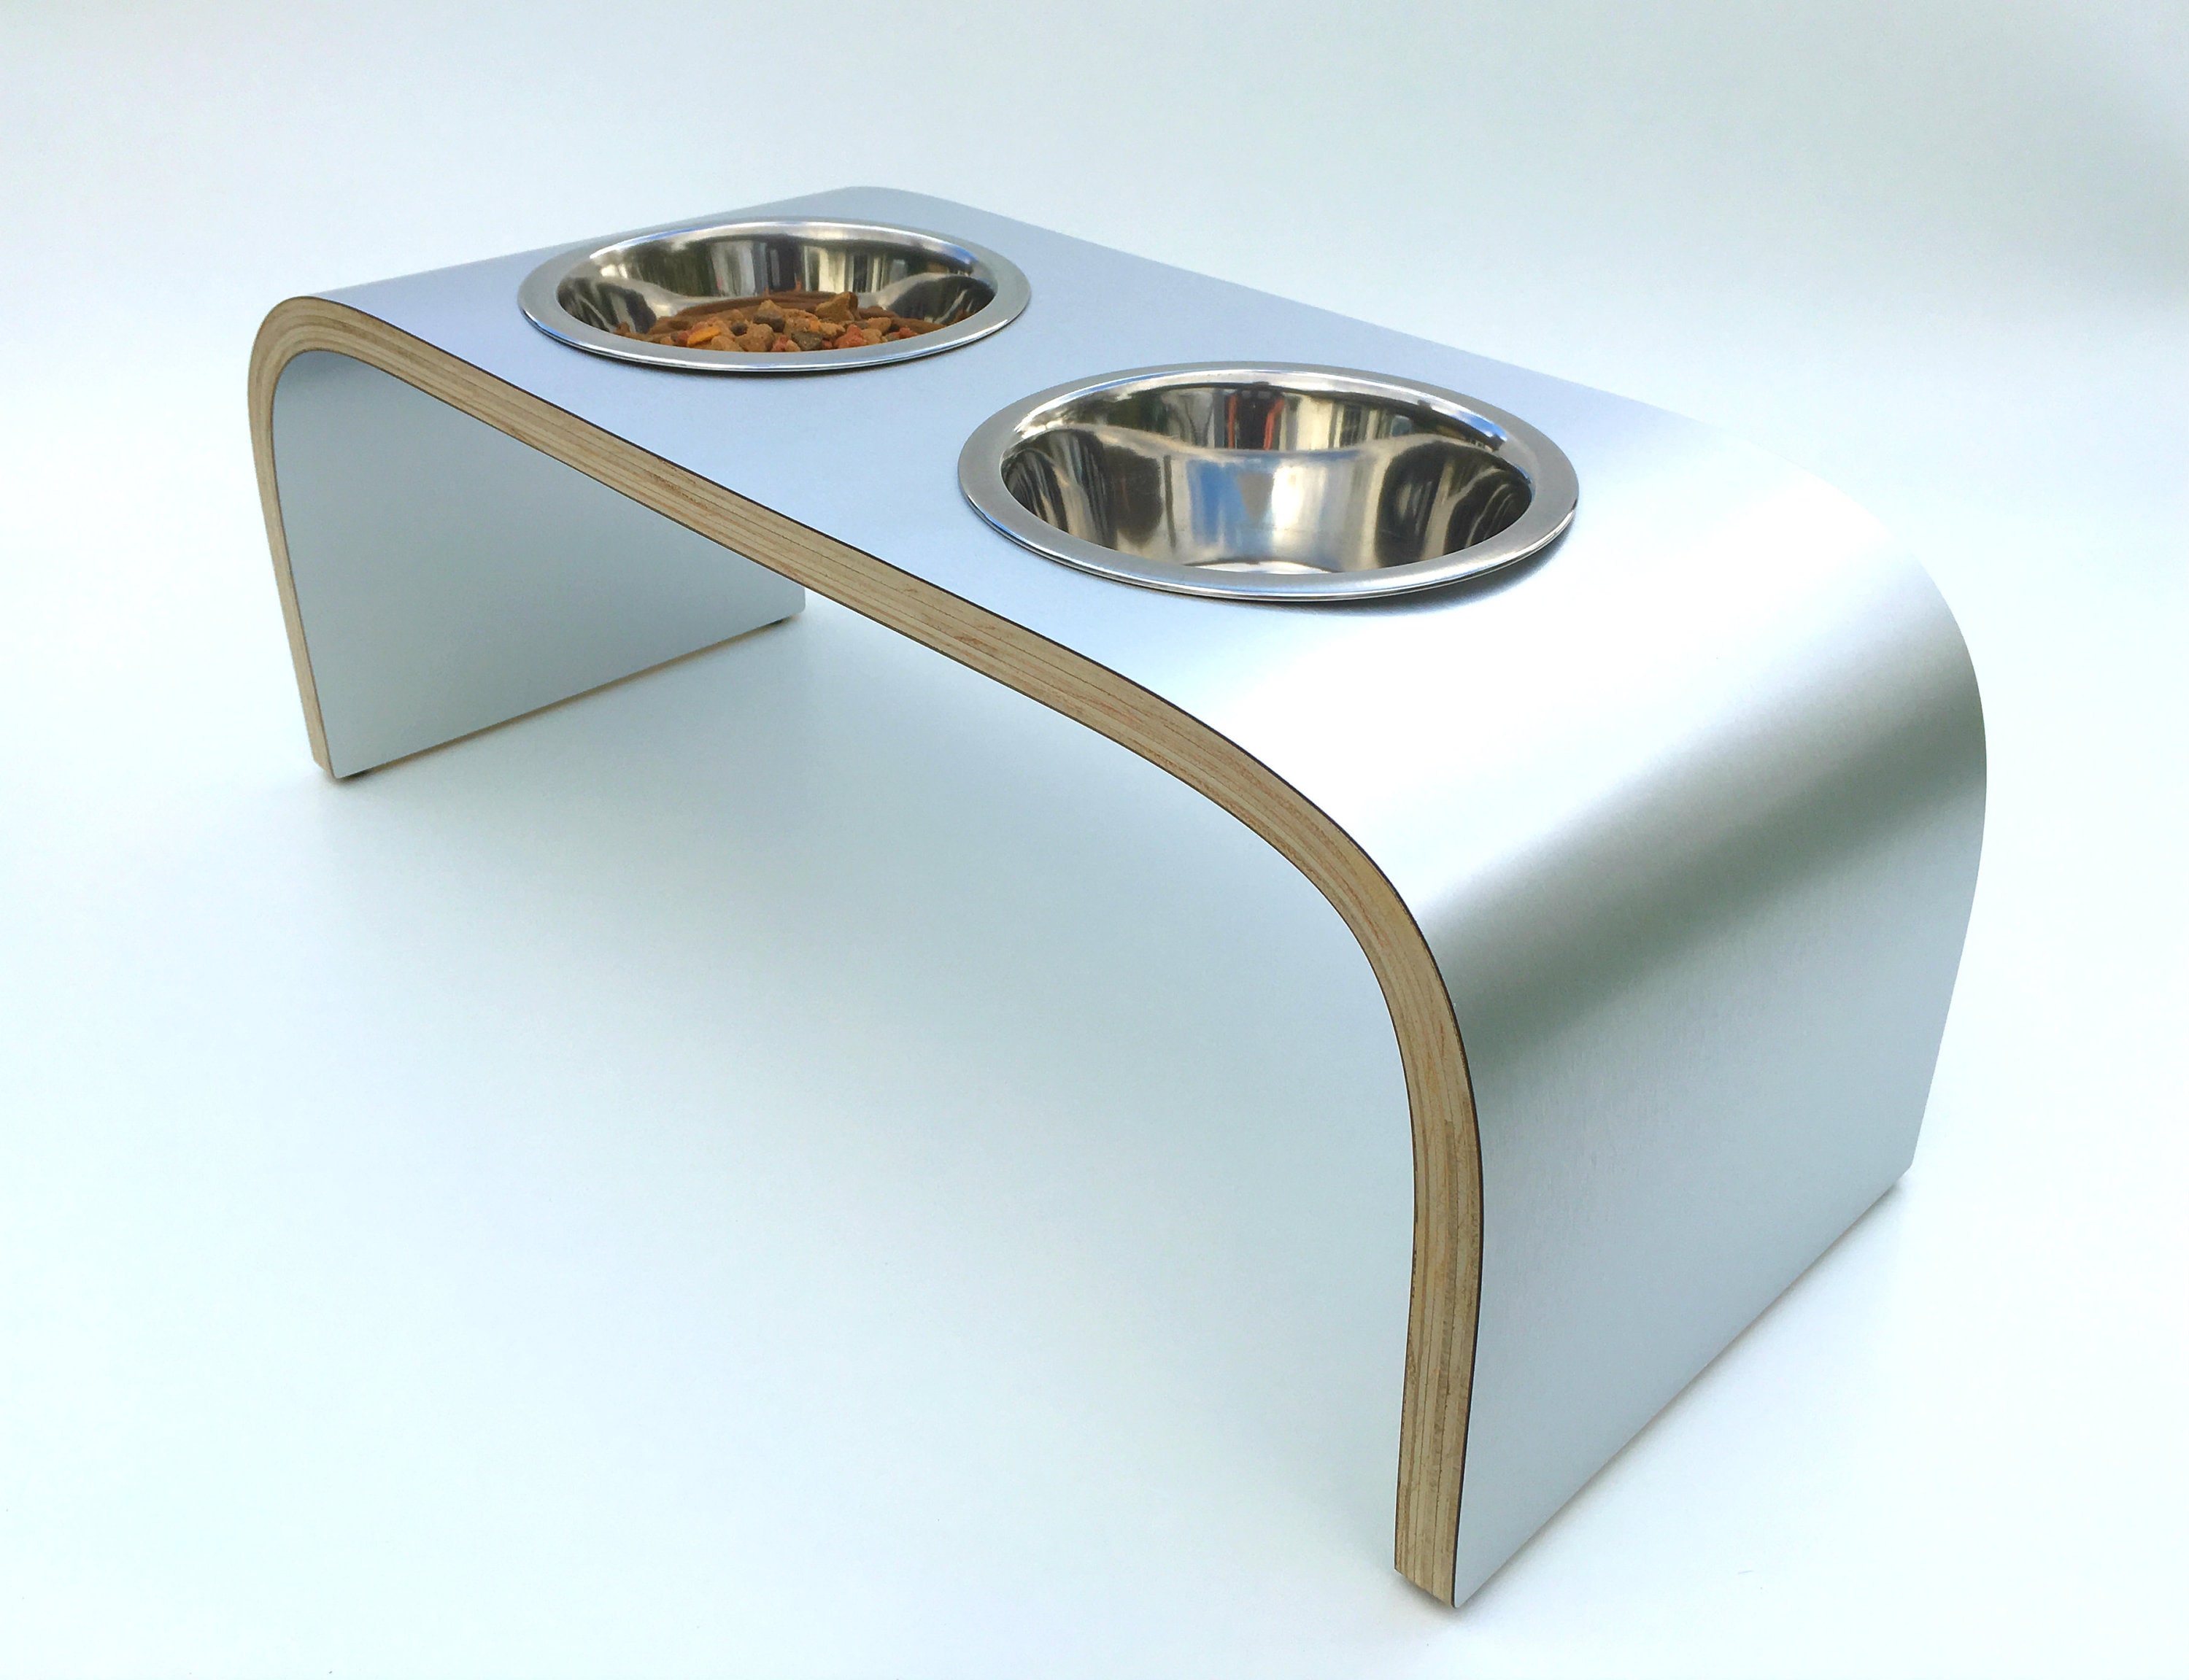 Small Dog Feeder / Small Dog Bowls Stand With Stone Top and Metal Base /  Middle Size Raised Bowls for Pet / Grey Dog Feeder / White Feeder 